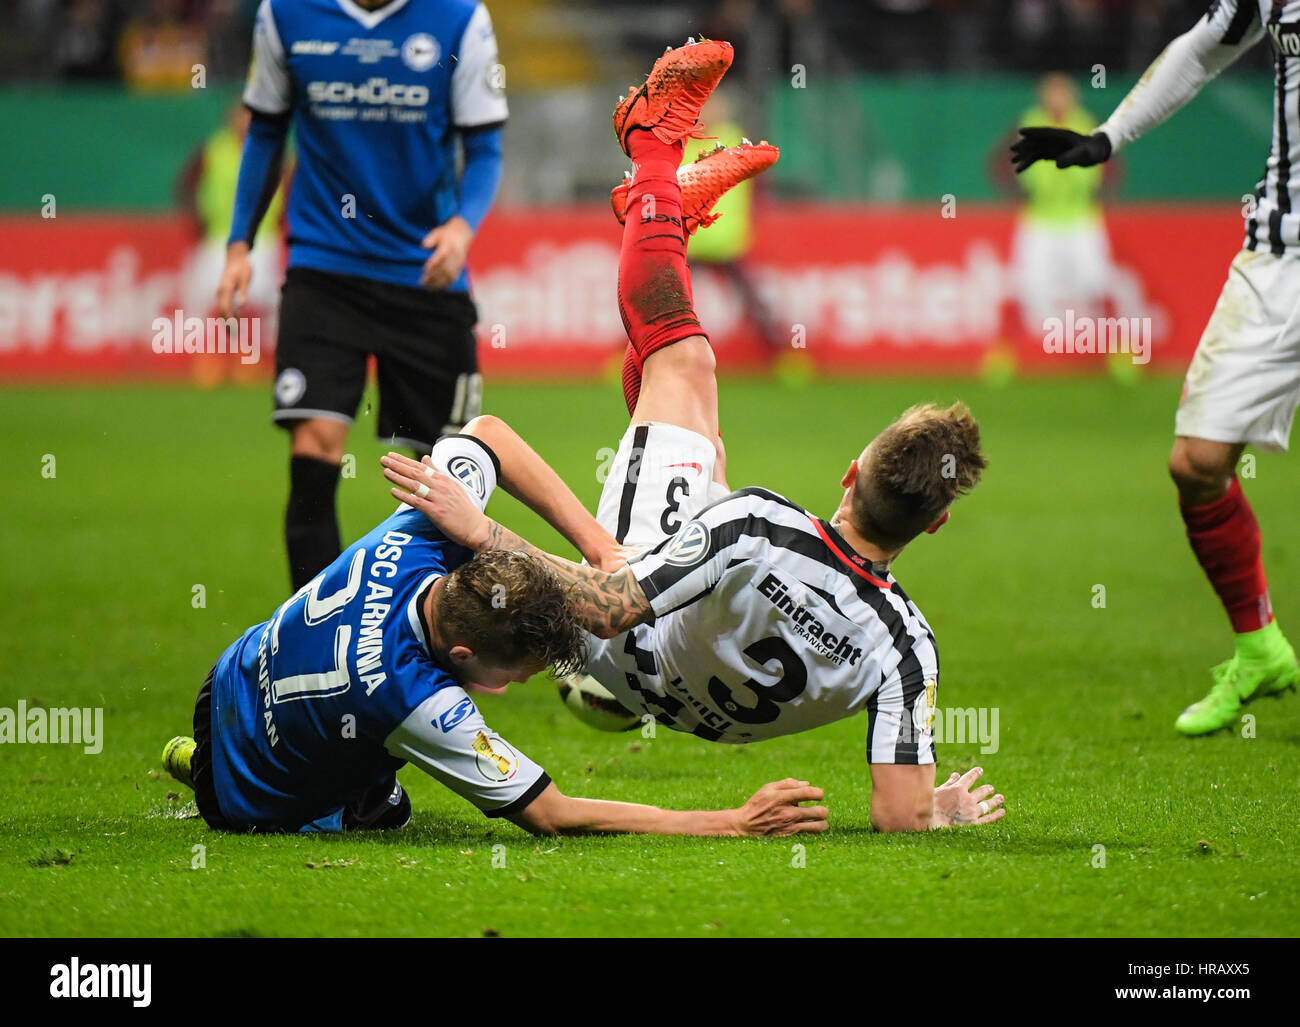 Frankfurt's Guillermo Varela (R)and Arminia's Sebastian Schuppan vie for  the ball during the German Football Association (DFB) Cup quarter final  fixture between Eintracht Frankfurt and Arminia Bielefeld in the  Commerzbank Arena in